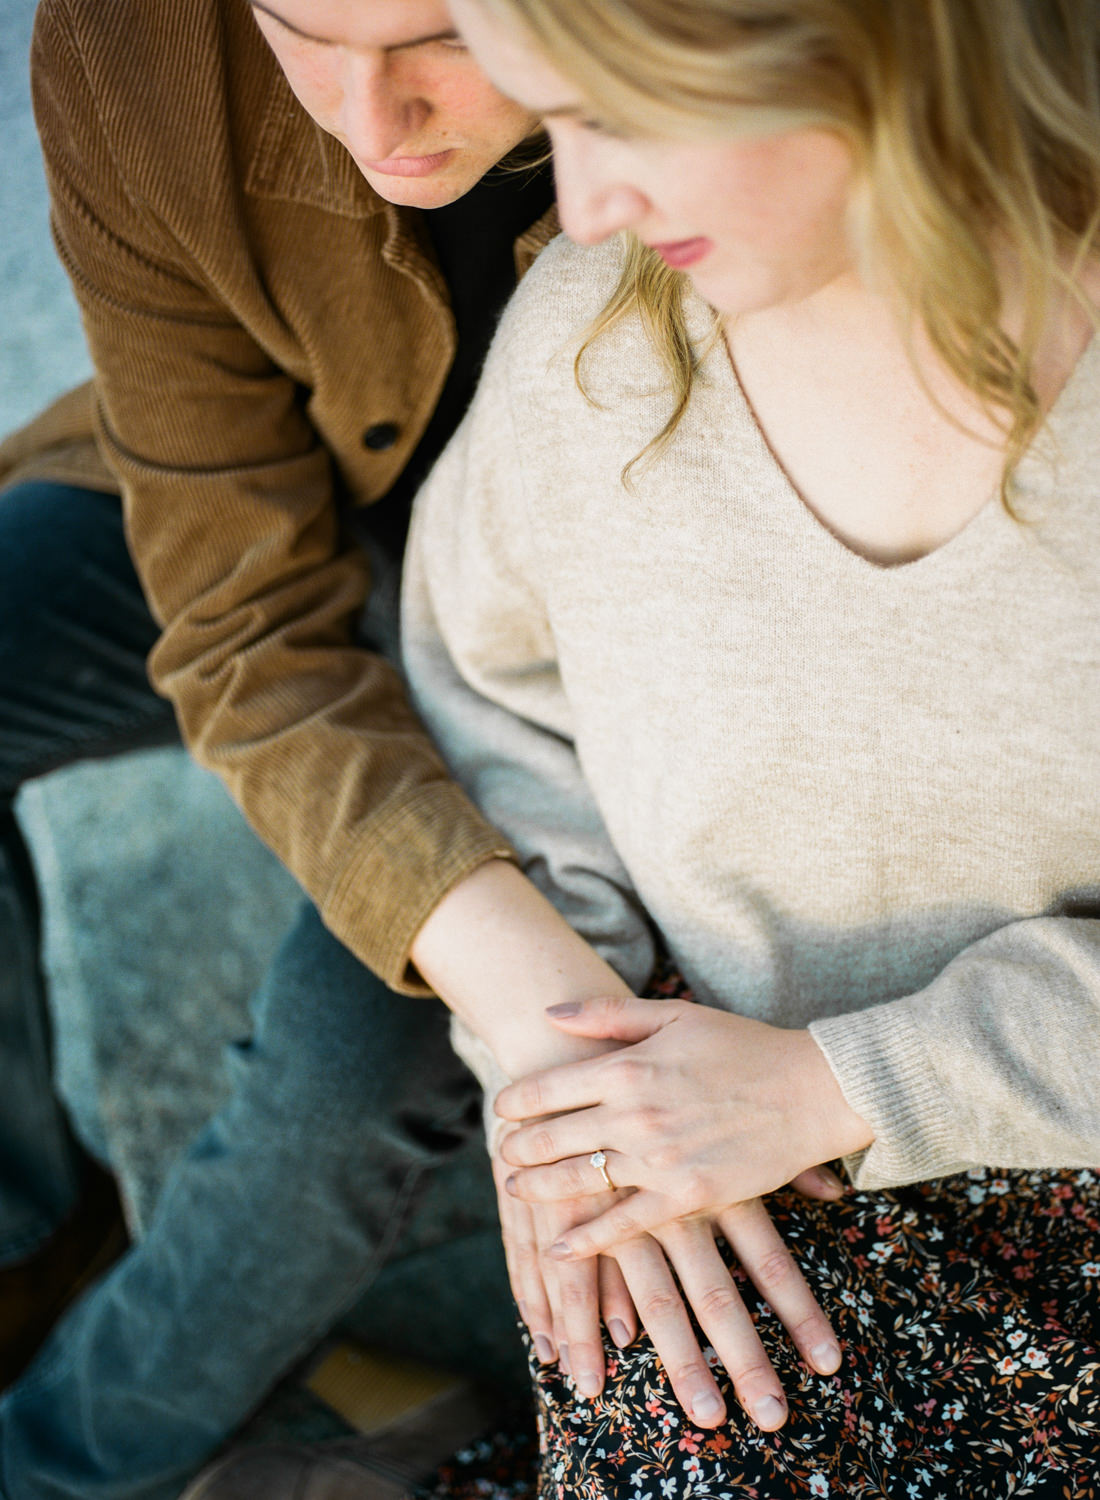 St. Louis engagement and wedding photographer